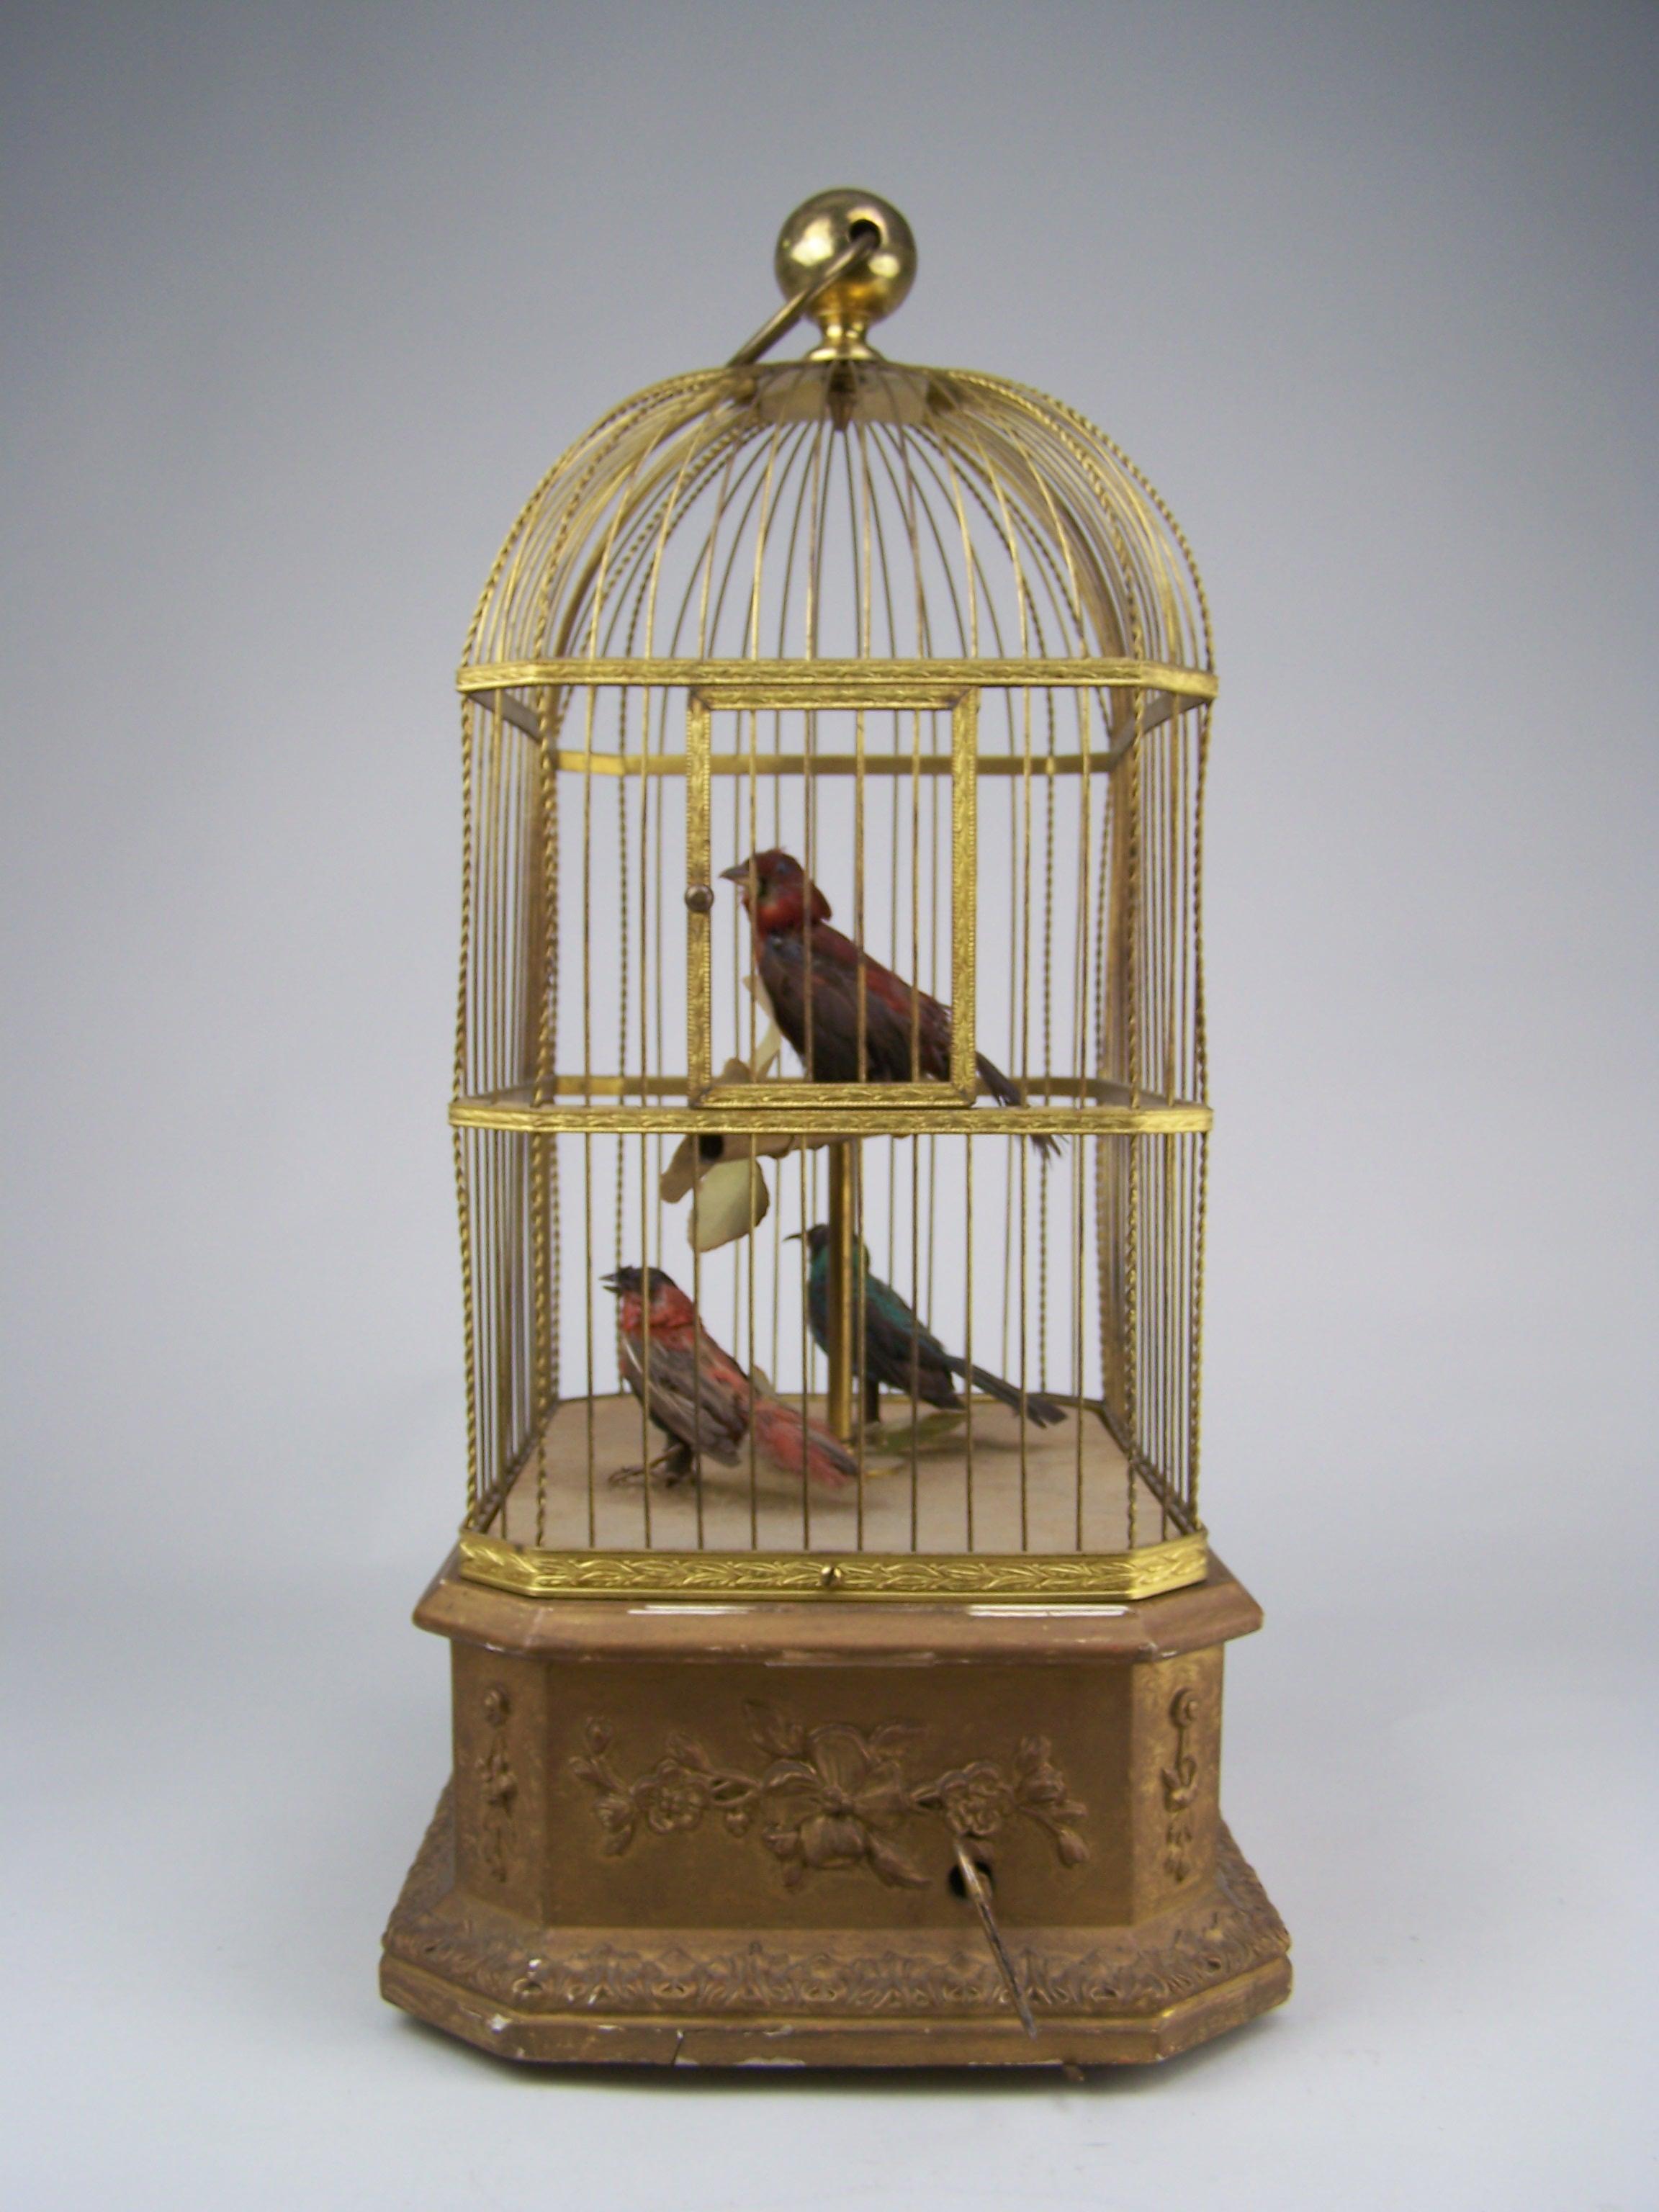 Gilt Singing Bird Cage with 3 birds by Bontems 